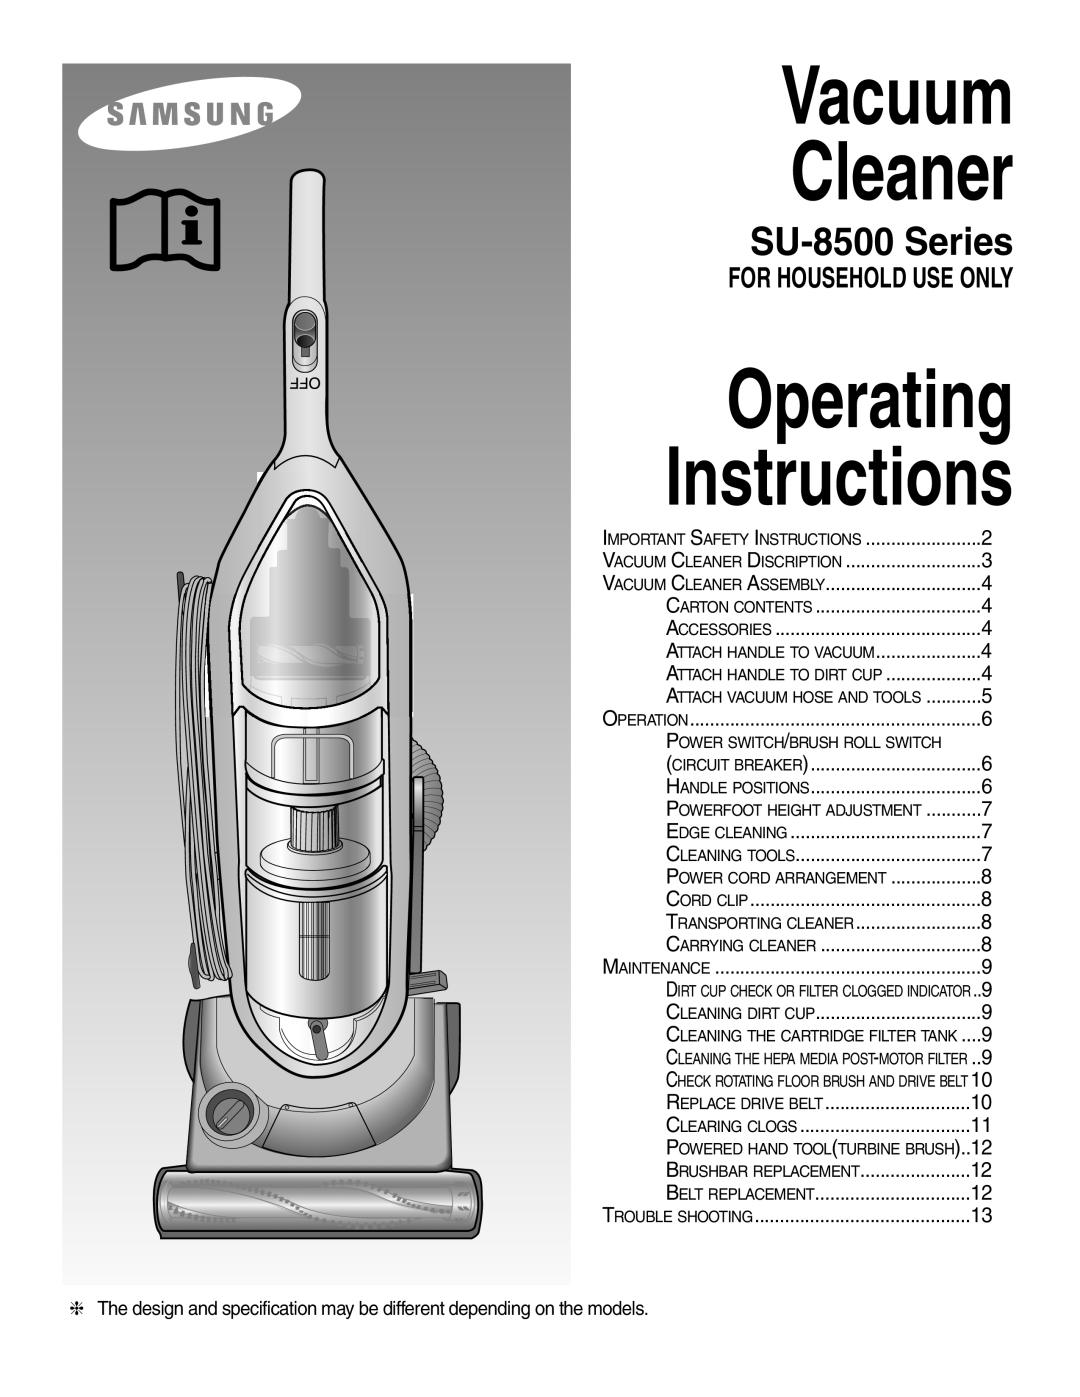 Samsung operating instructions For Household Use Only, Vacuum Cleaner, Operating Instructions, SU-8500Series 